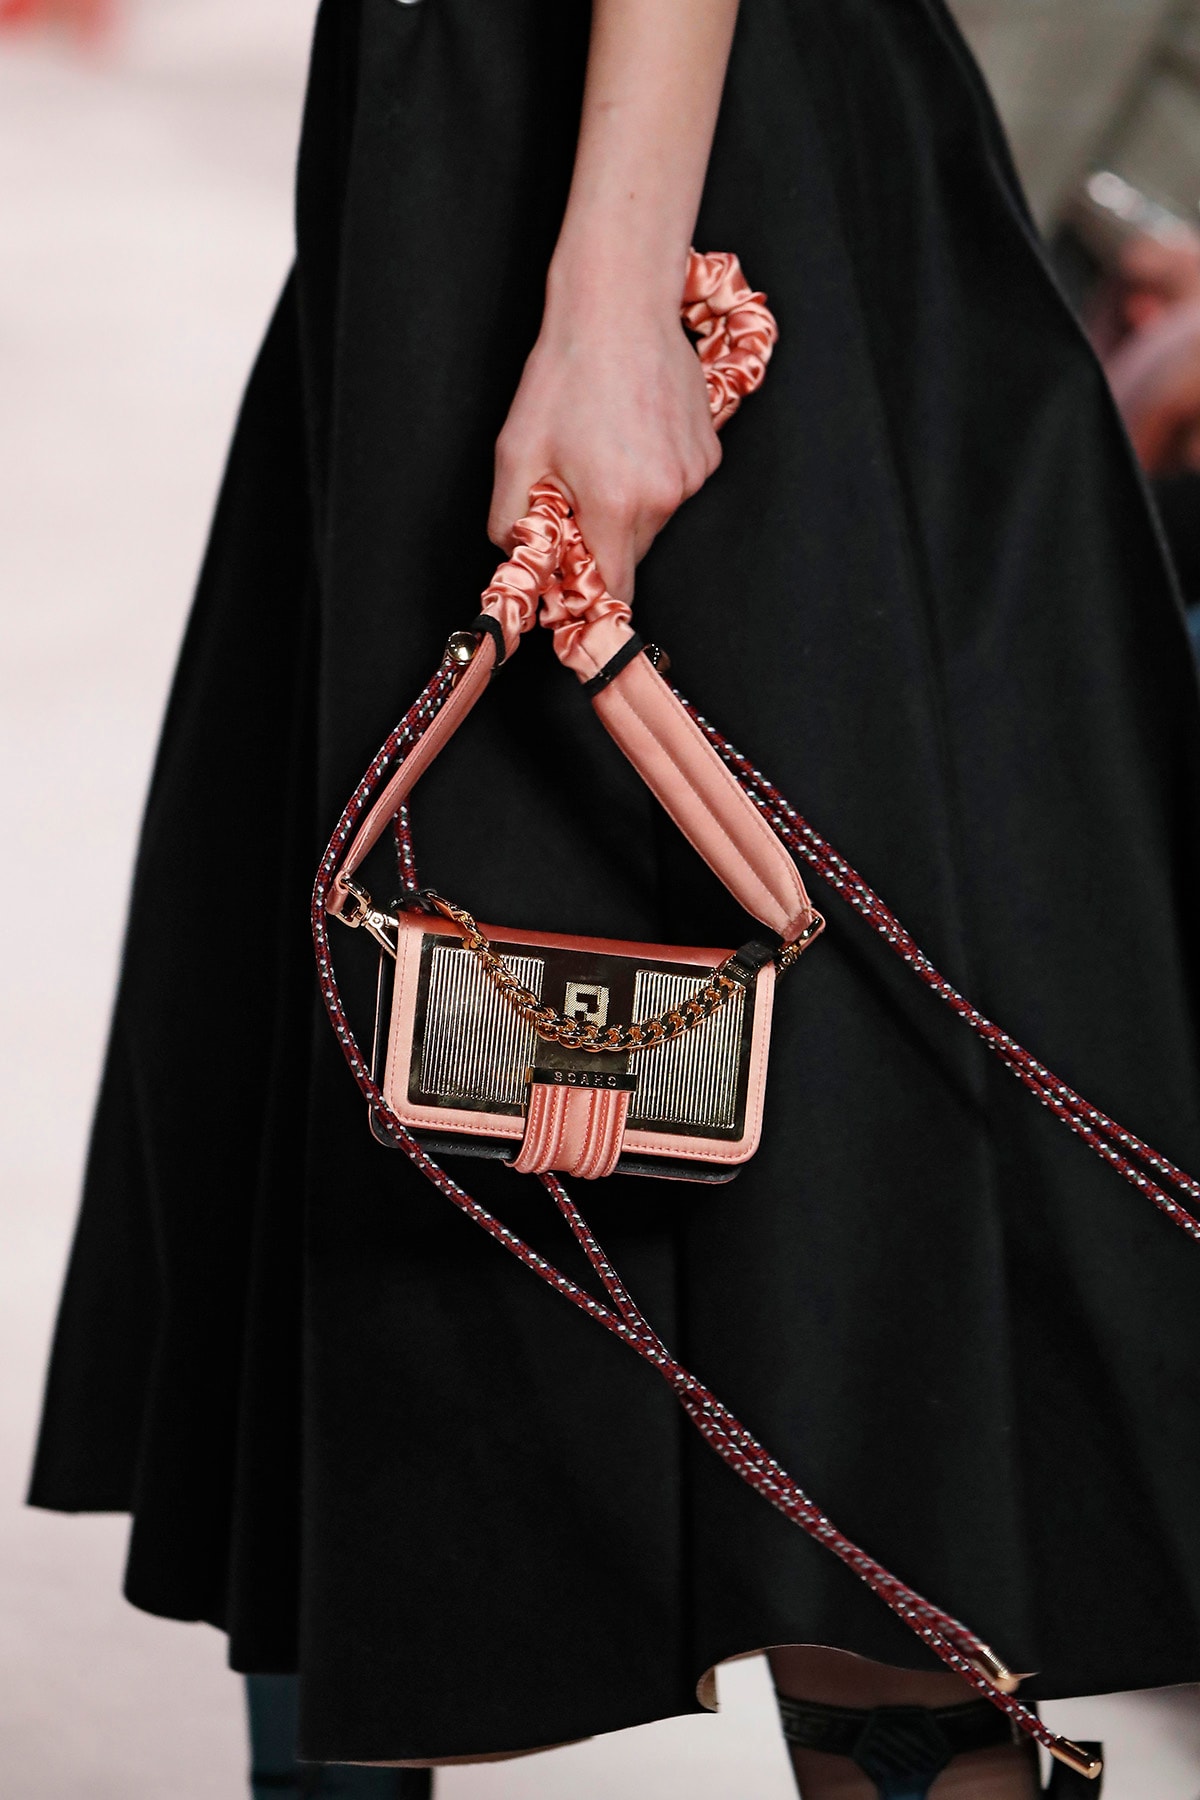 Must-haves: 10 famous Dior bags that exude timeless elegance and style